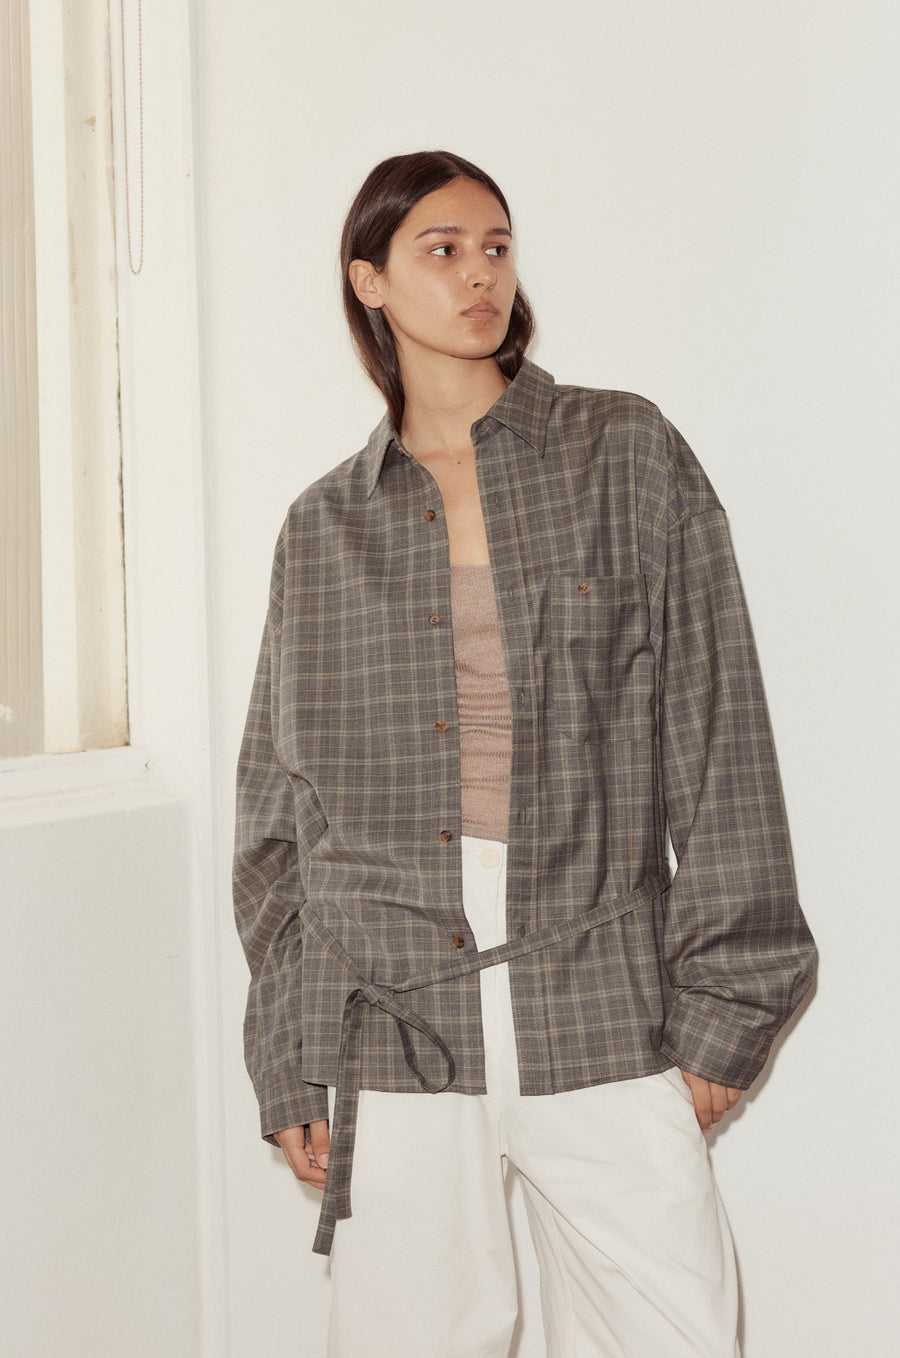 Mid shot of female model wearing the Wool Shirt in Everyday Check by Deiji Studios, styled with the Bartack Pant in white. Shirt features pointed collar, button front with single breast pocket and self fabric waist tie in subtly lustrous wool check.